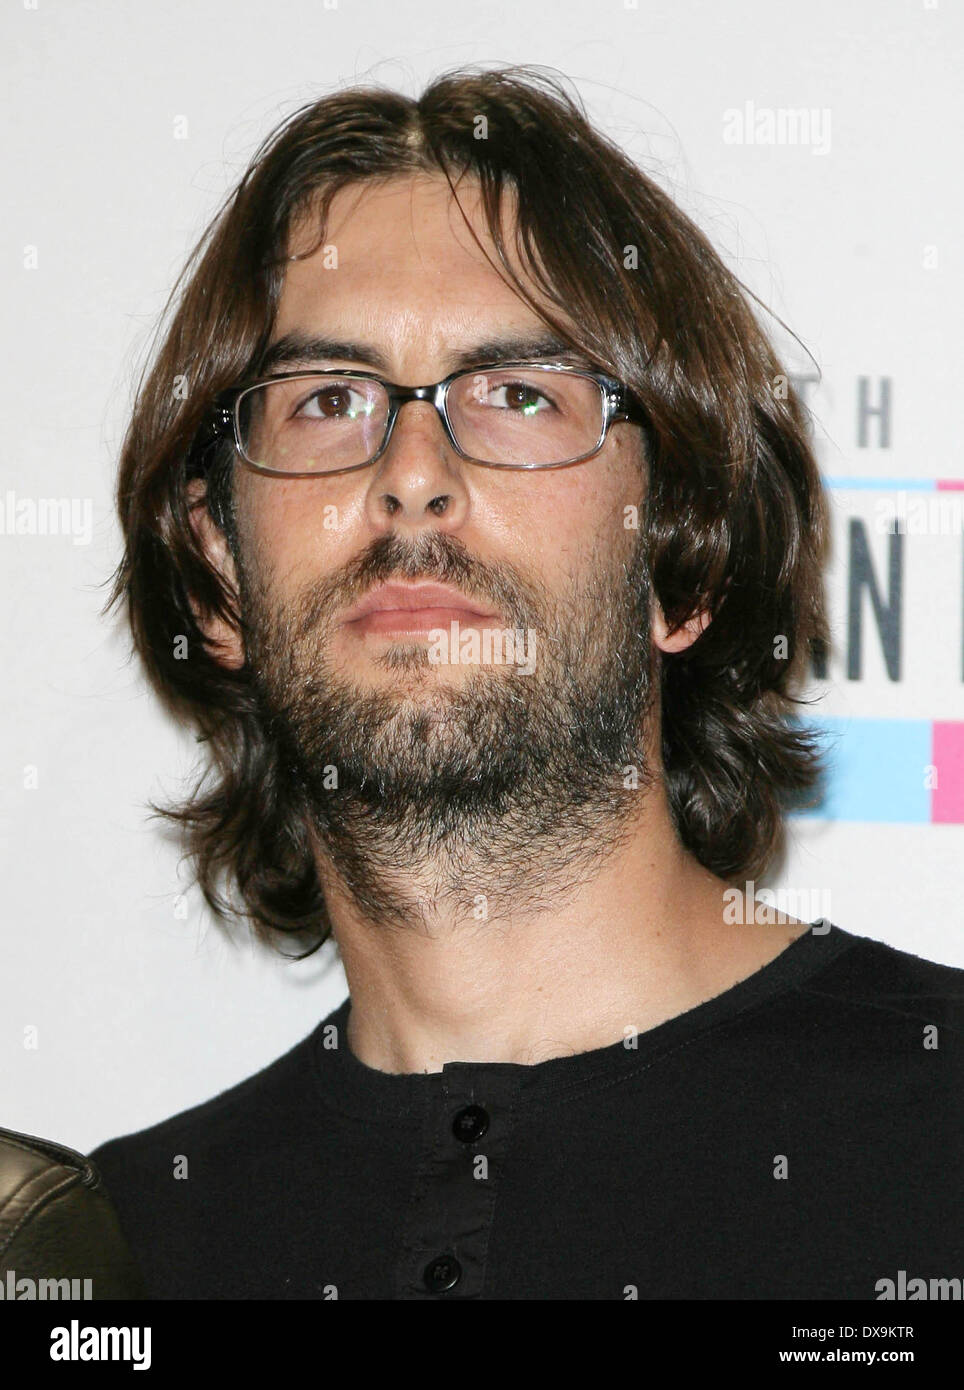 Rob Bourdon of 'Linkin Park' he 40th Anniversary American Music Awards  2012, held at Nokia Theatre L.A. Live - Pressroom Los Angeles, California -  18.11.12 Featuring: Rob Bourdon of 'Linkin Park' Where: